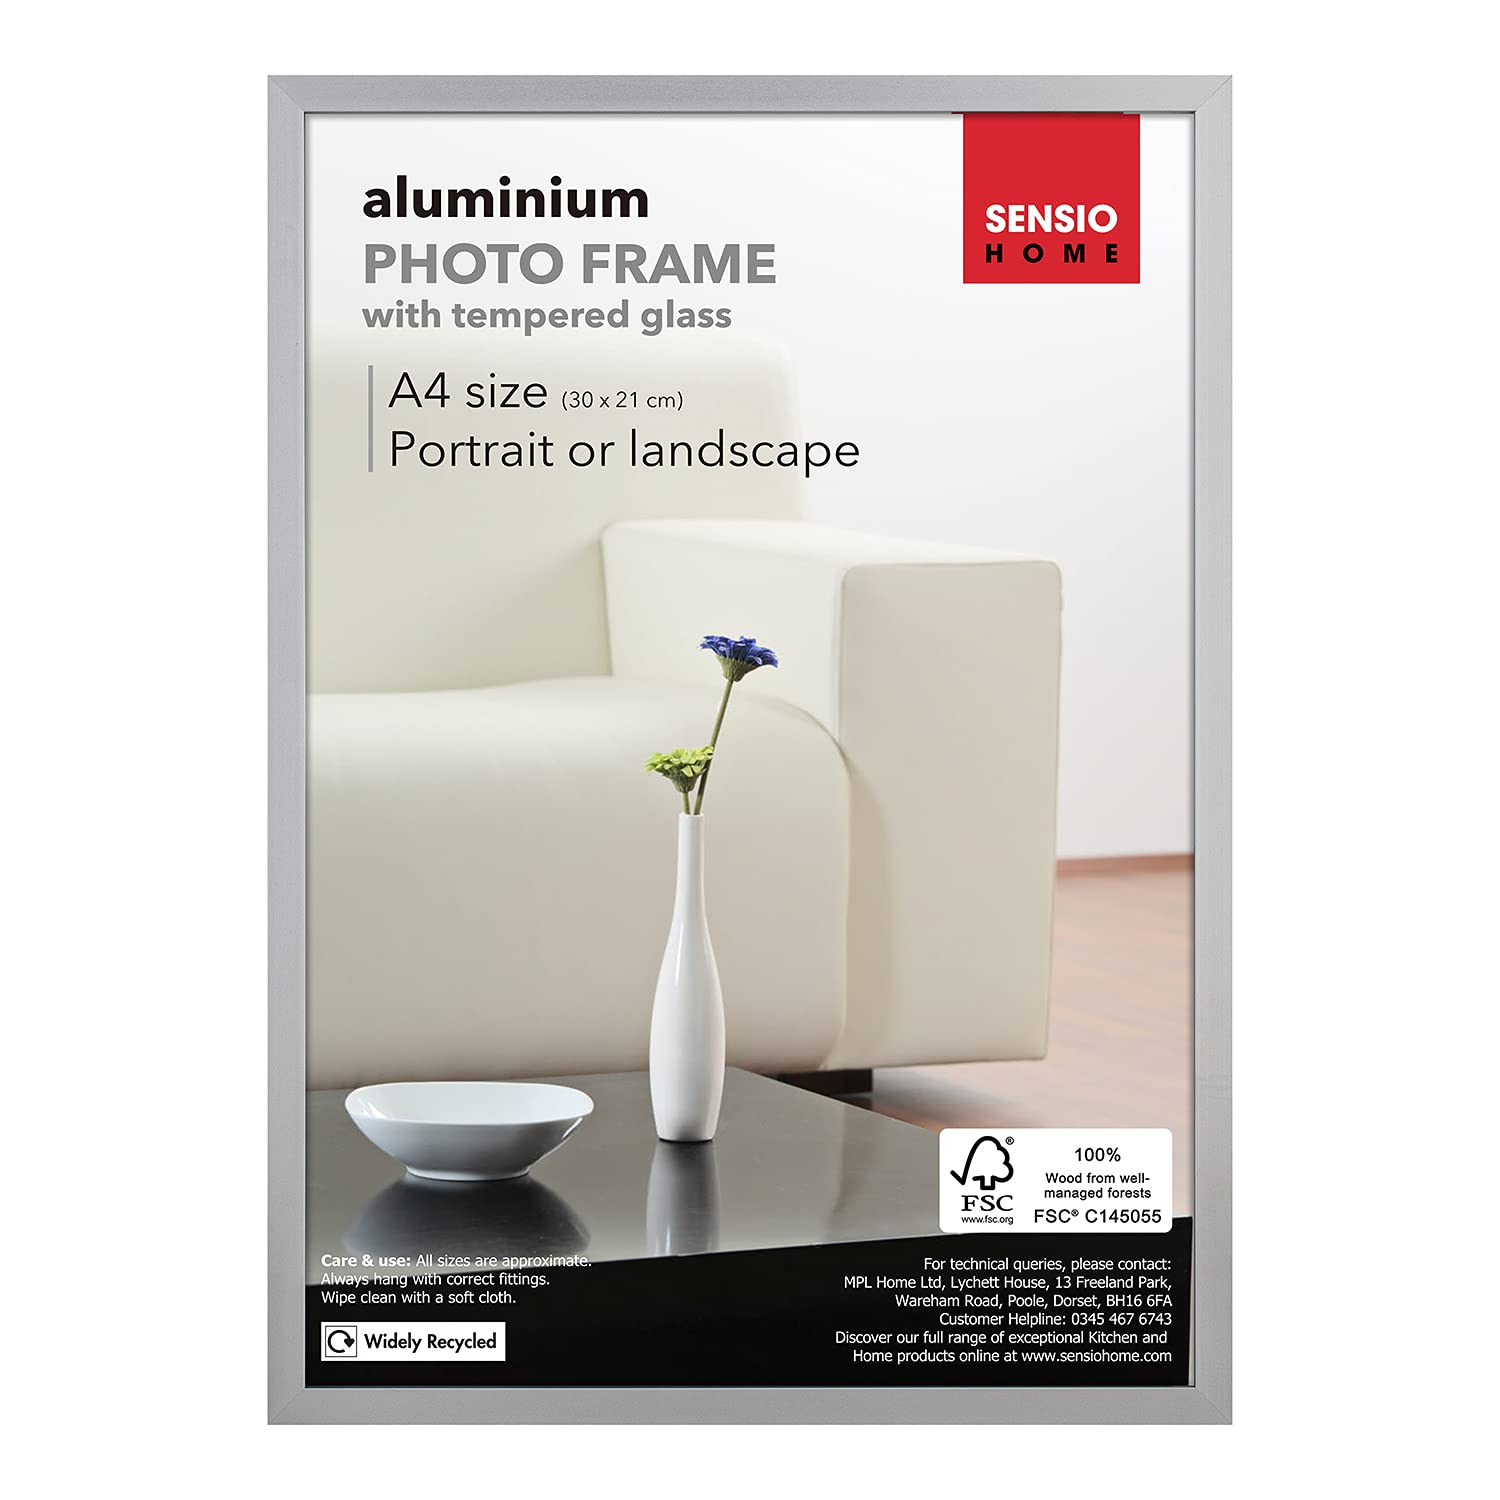 Sensio Home A4 Photo Frame Aluminium Silver Tempered Safety Glass Premium Quality (1 Pack, Silver)